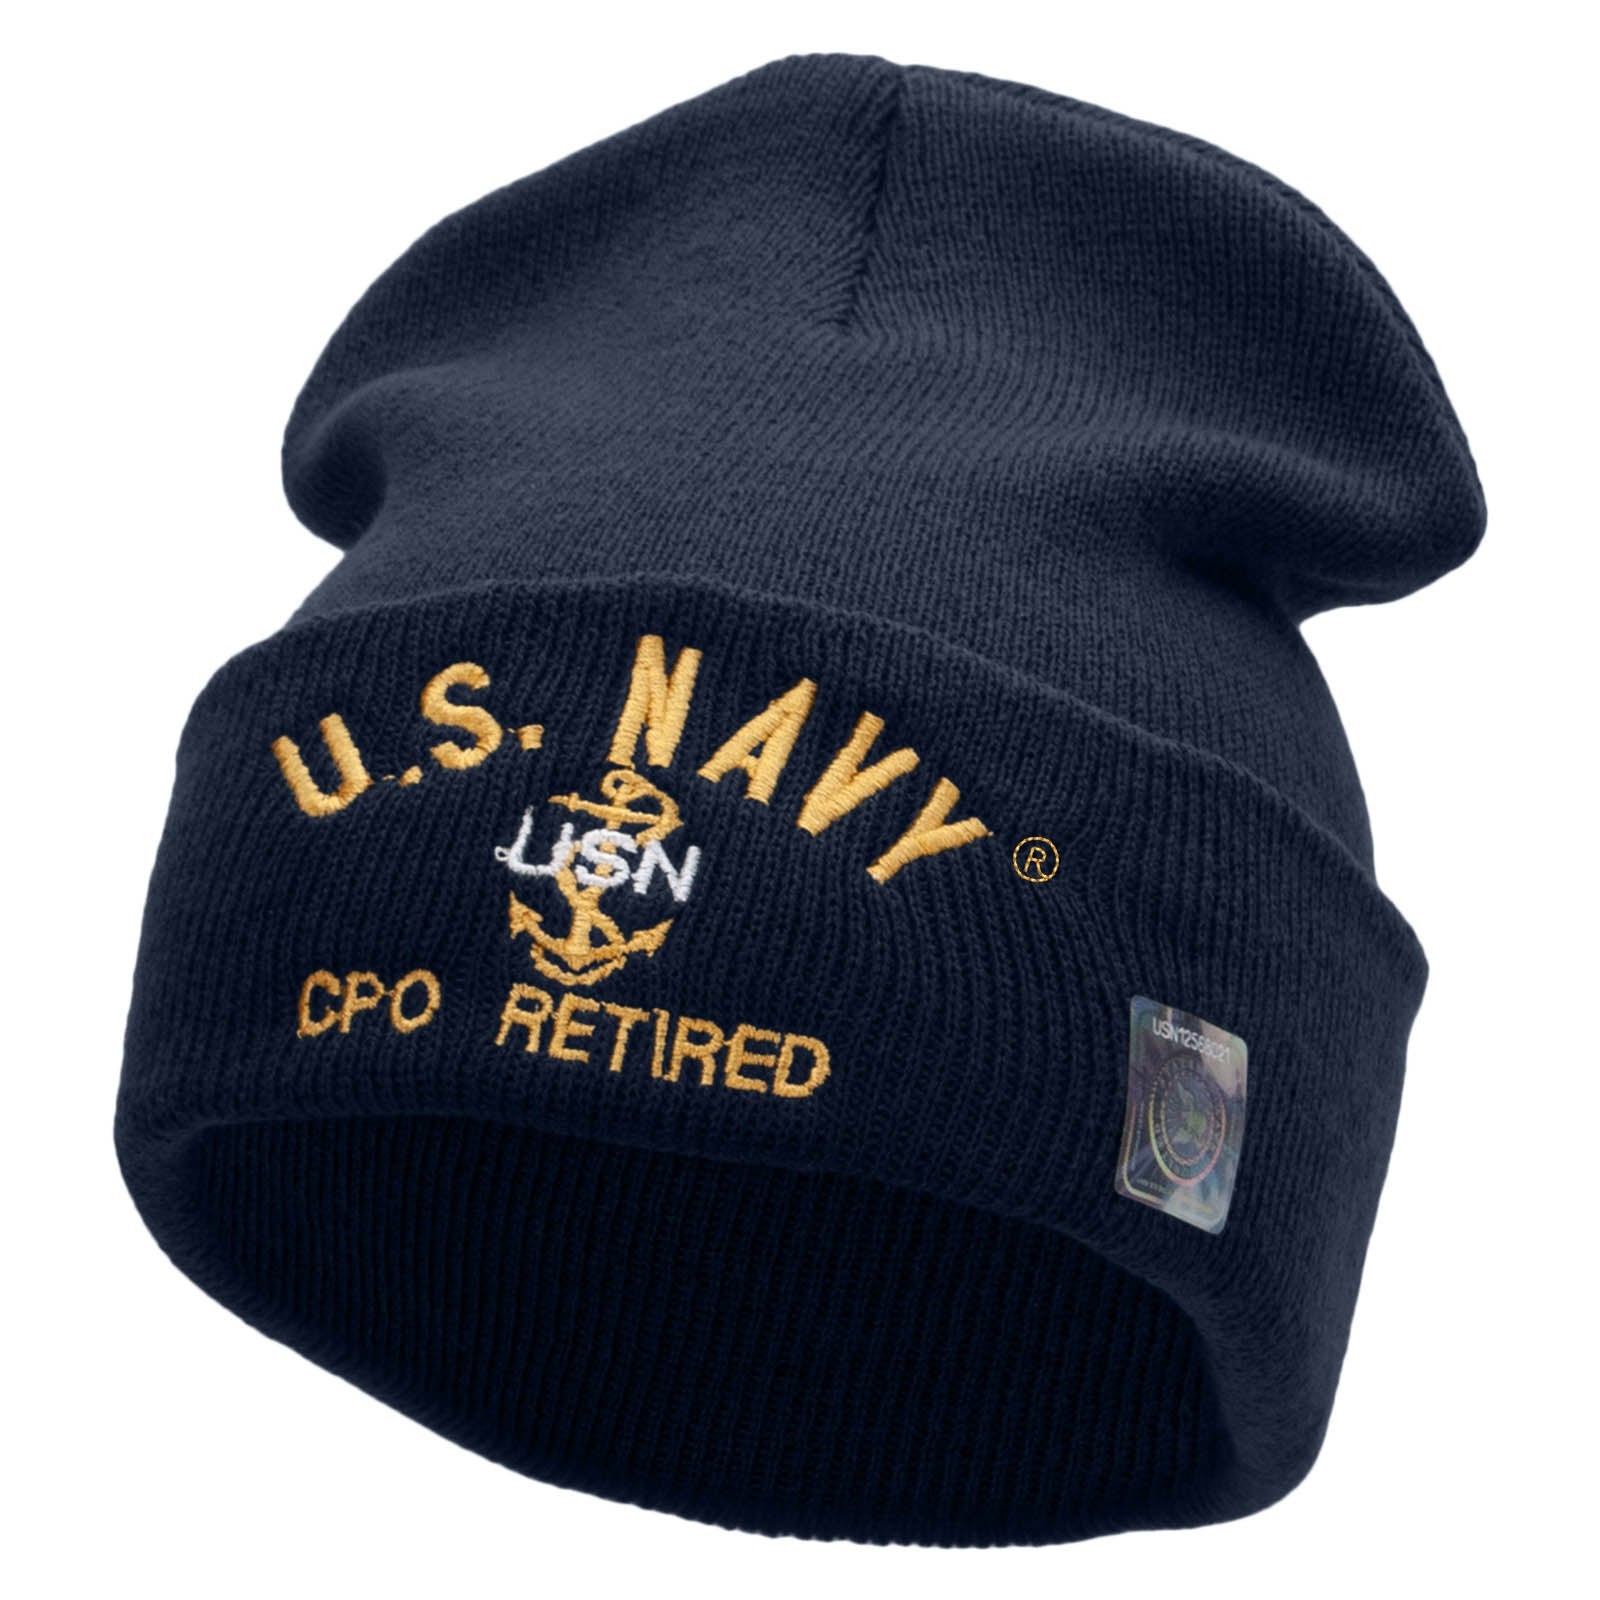 Licensed US Navy CPO Retired Military Embroidered Long Beanie Made in USA - Navy OSFM